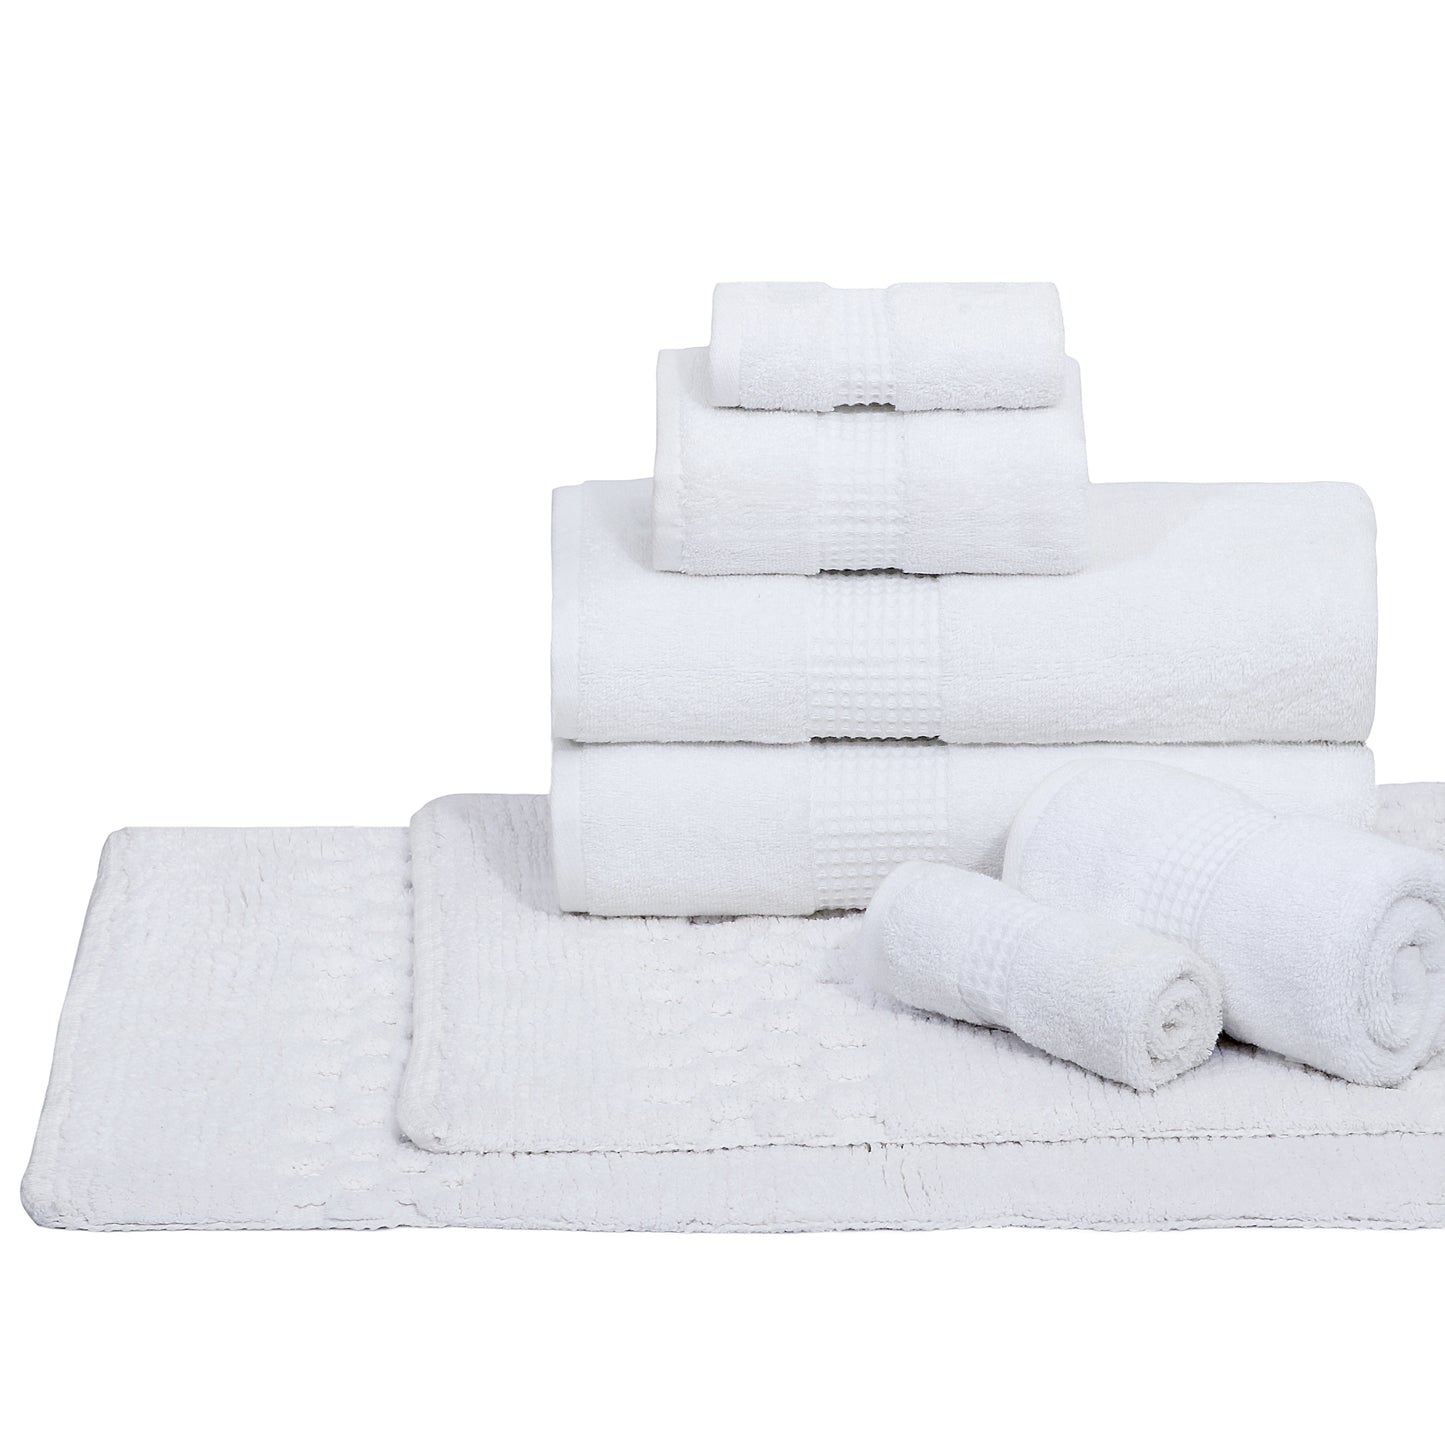 Combo Deal-Terry Towel 6 pc set and Honeycomb Bath rug 17x24/21x34 - TreeWool Bundle Deal#color_white